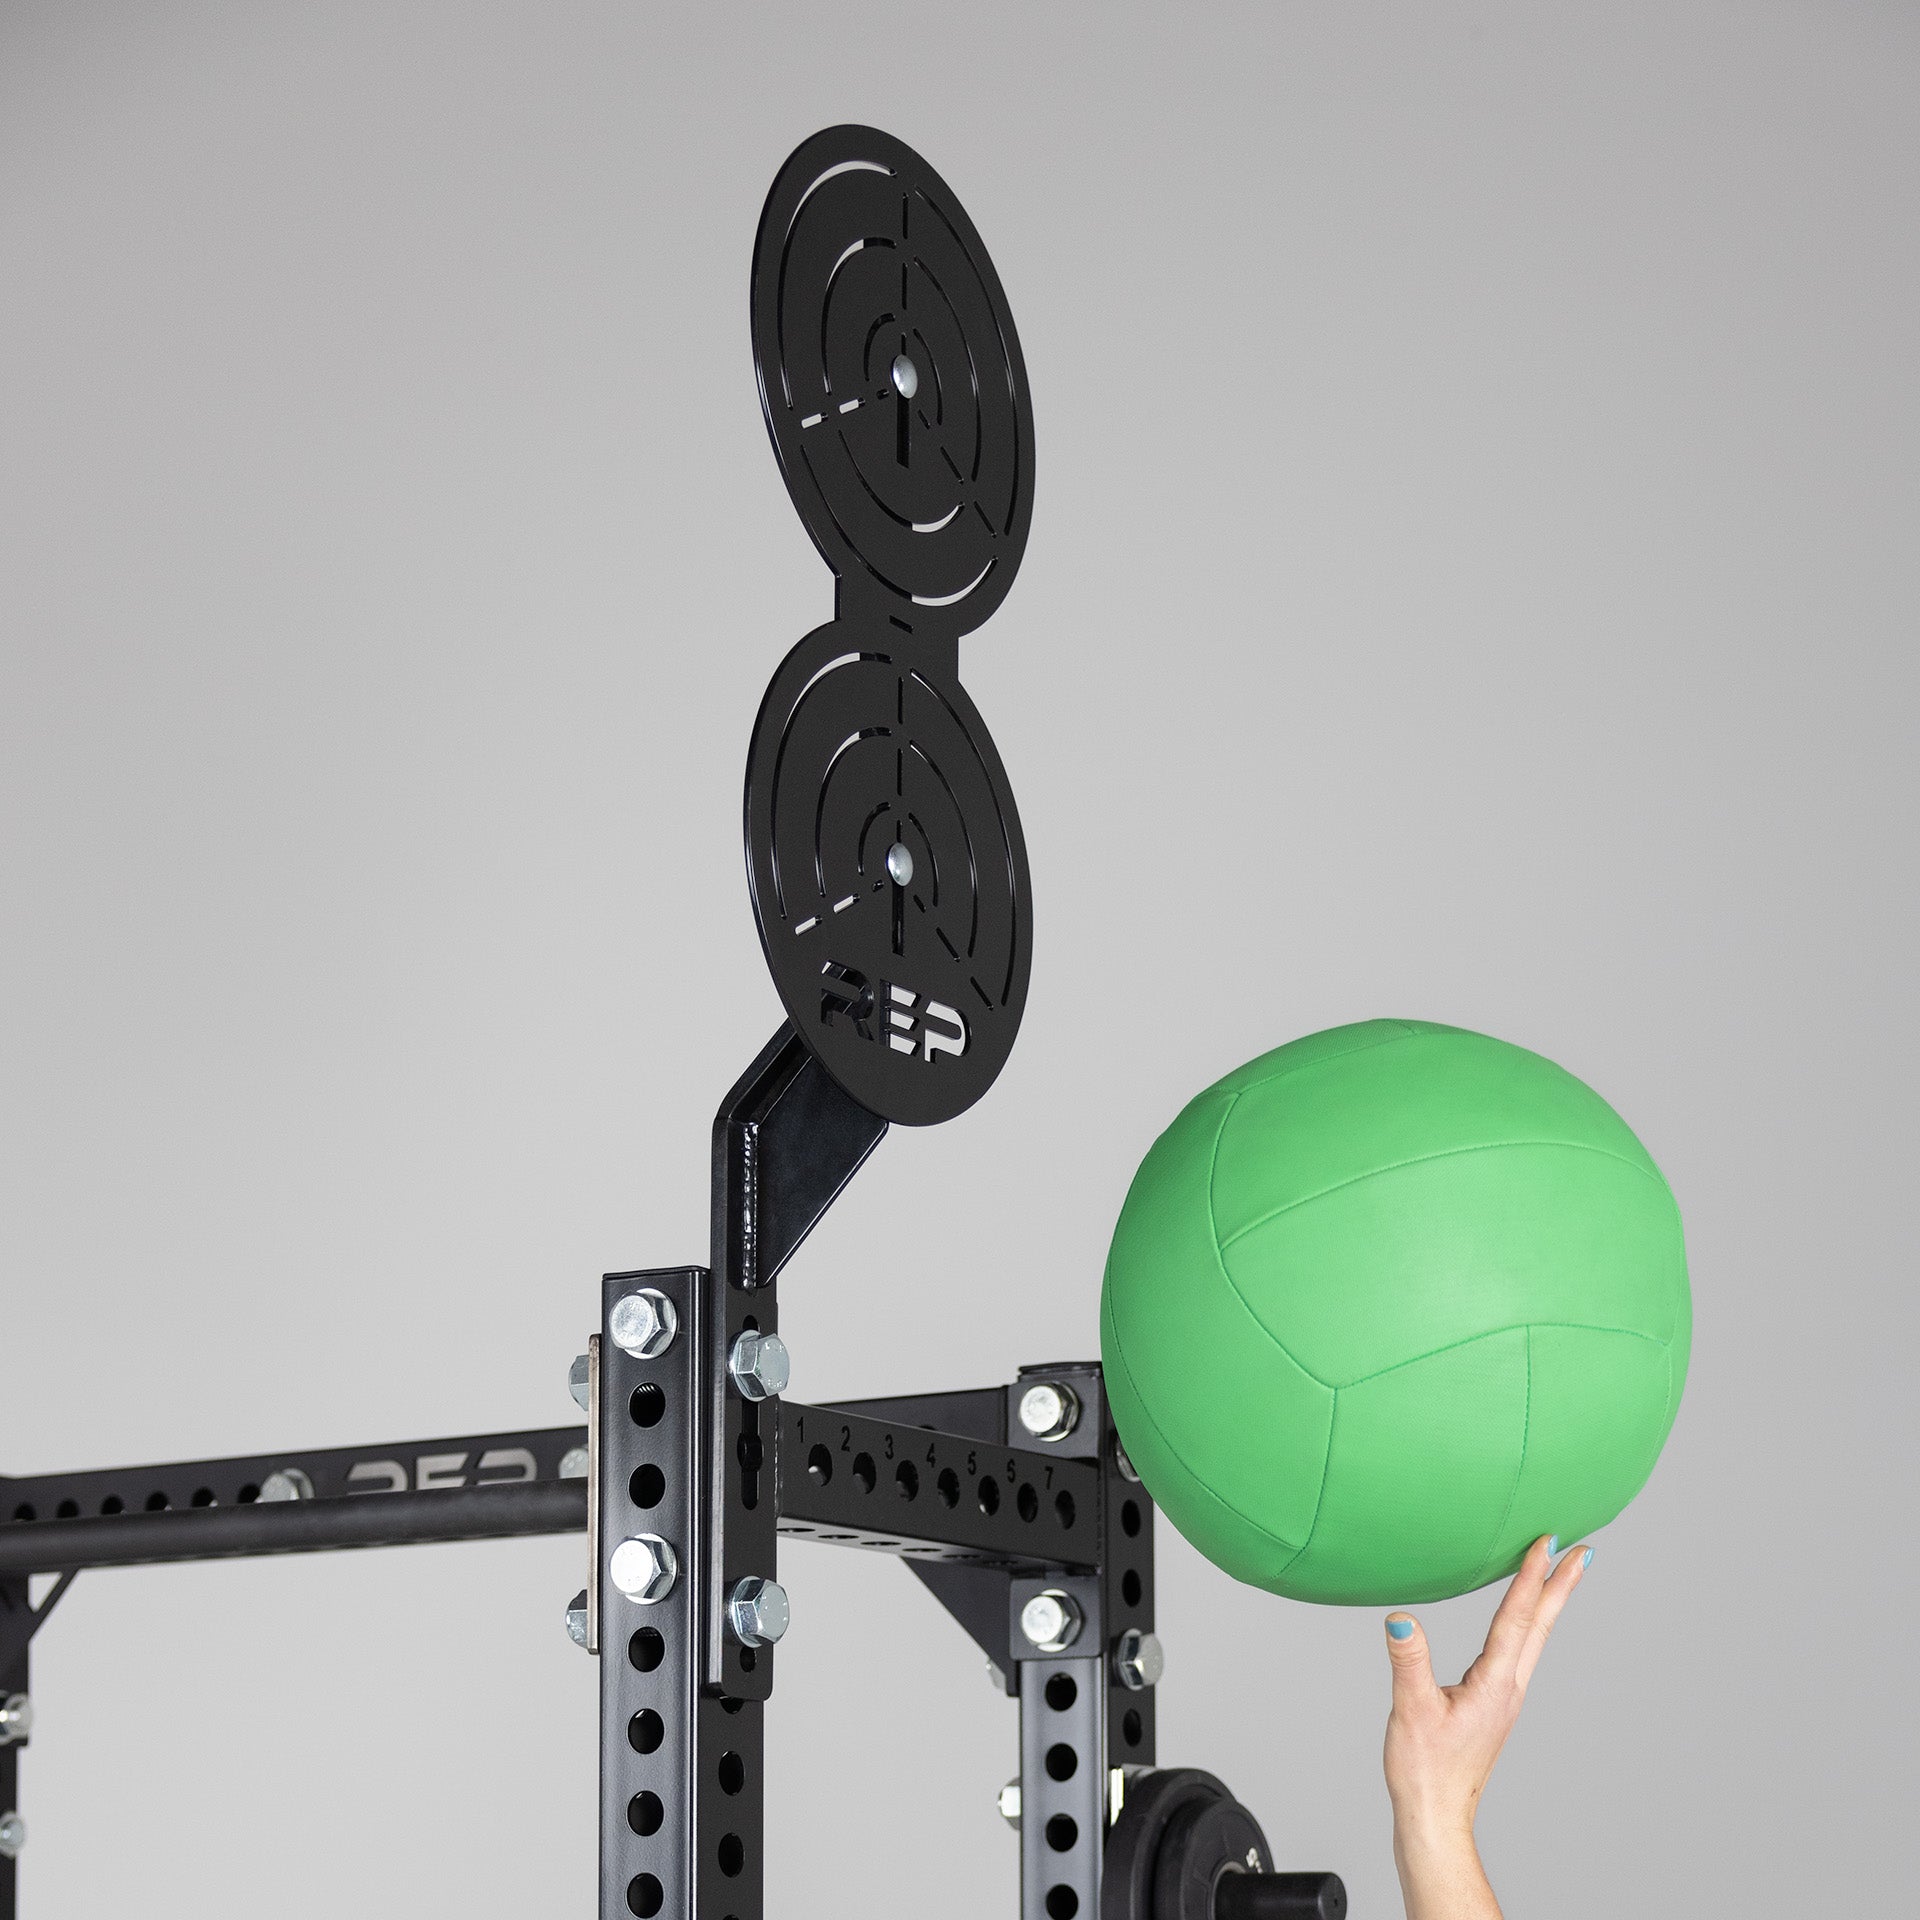 Wall Ball Target on the Apollo Half Rack (In Use)